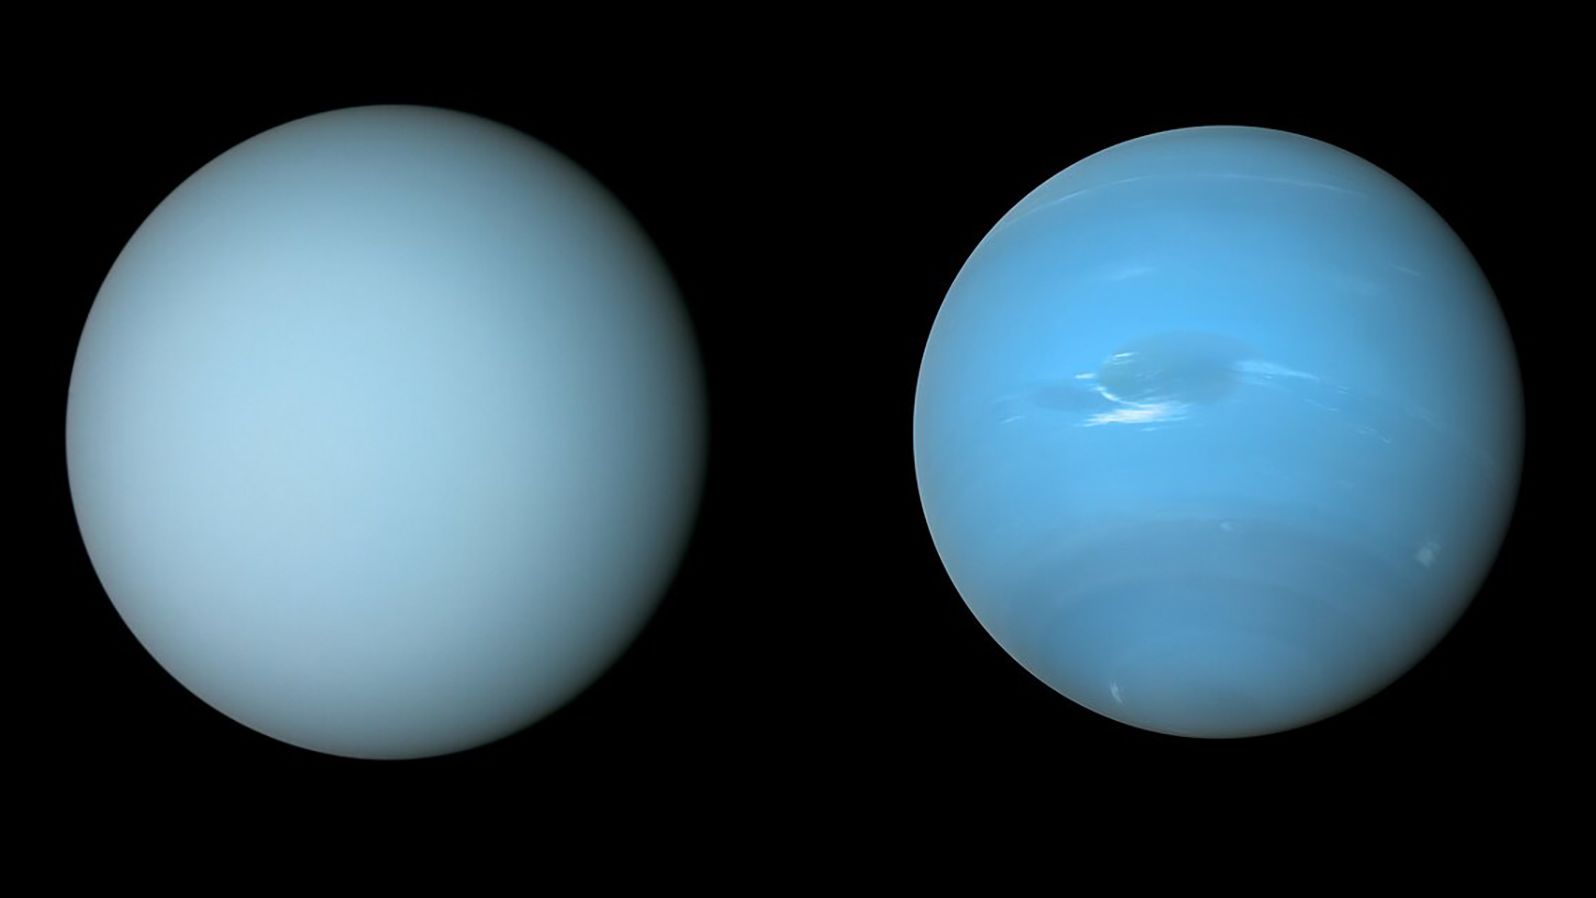 NASA's Voyager 2 spacecraft captured these views of Uranus (left) and Neptune (right) during its flybys of the planets in the 1980s.